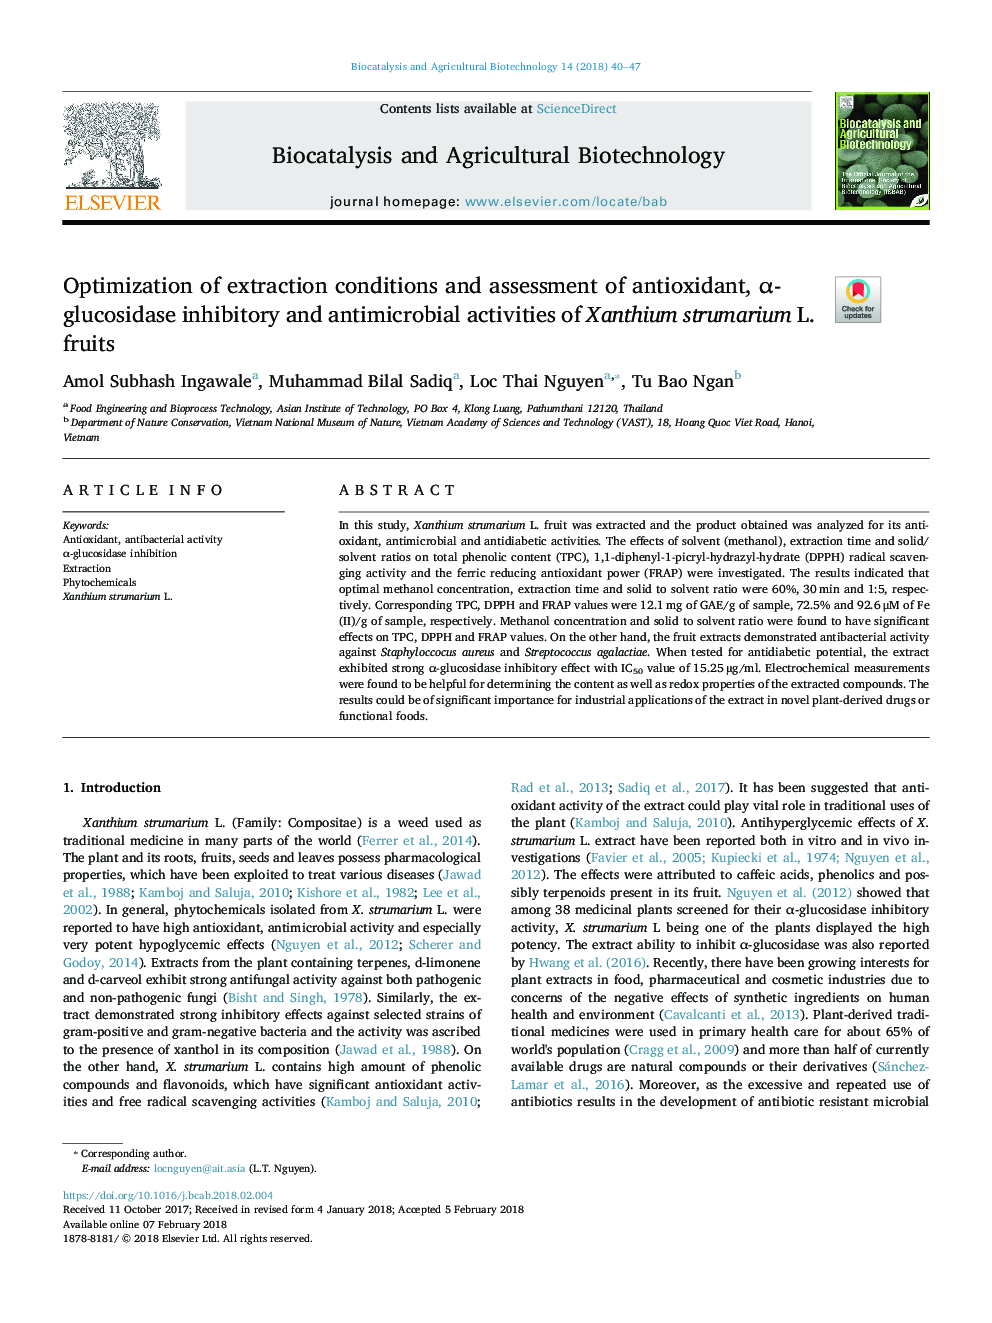 Optimization of extraction conditions and assessment of antioxidant, Î±-glucosidase inhibitory and antimicrobial activities of Xanthium strumarium L. fruits